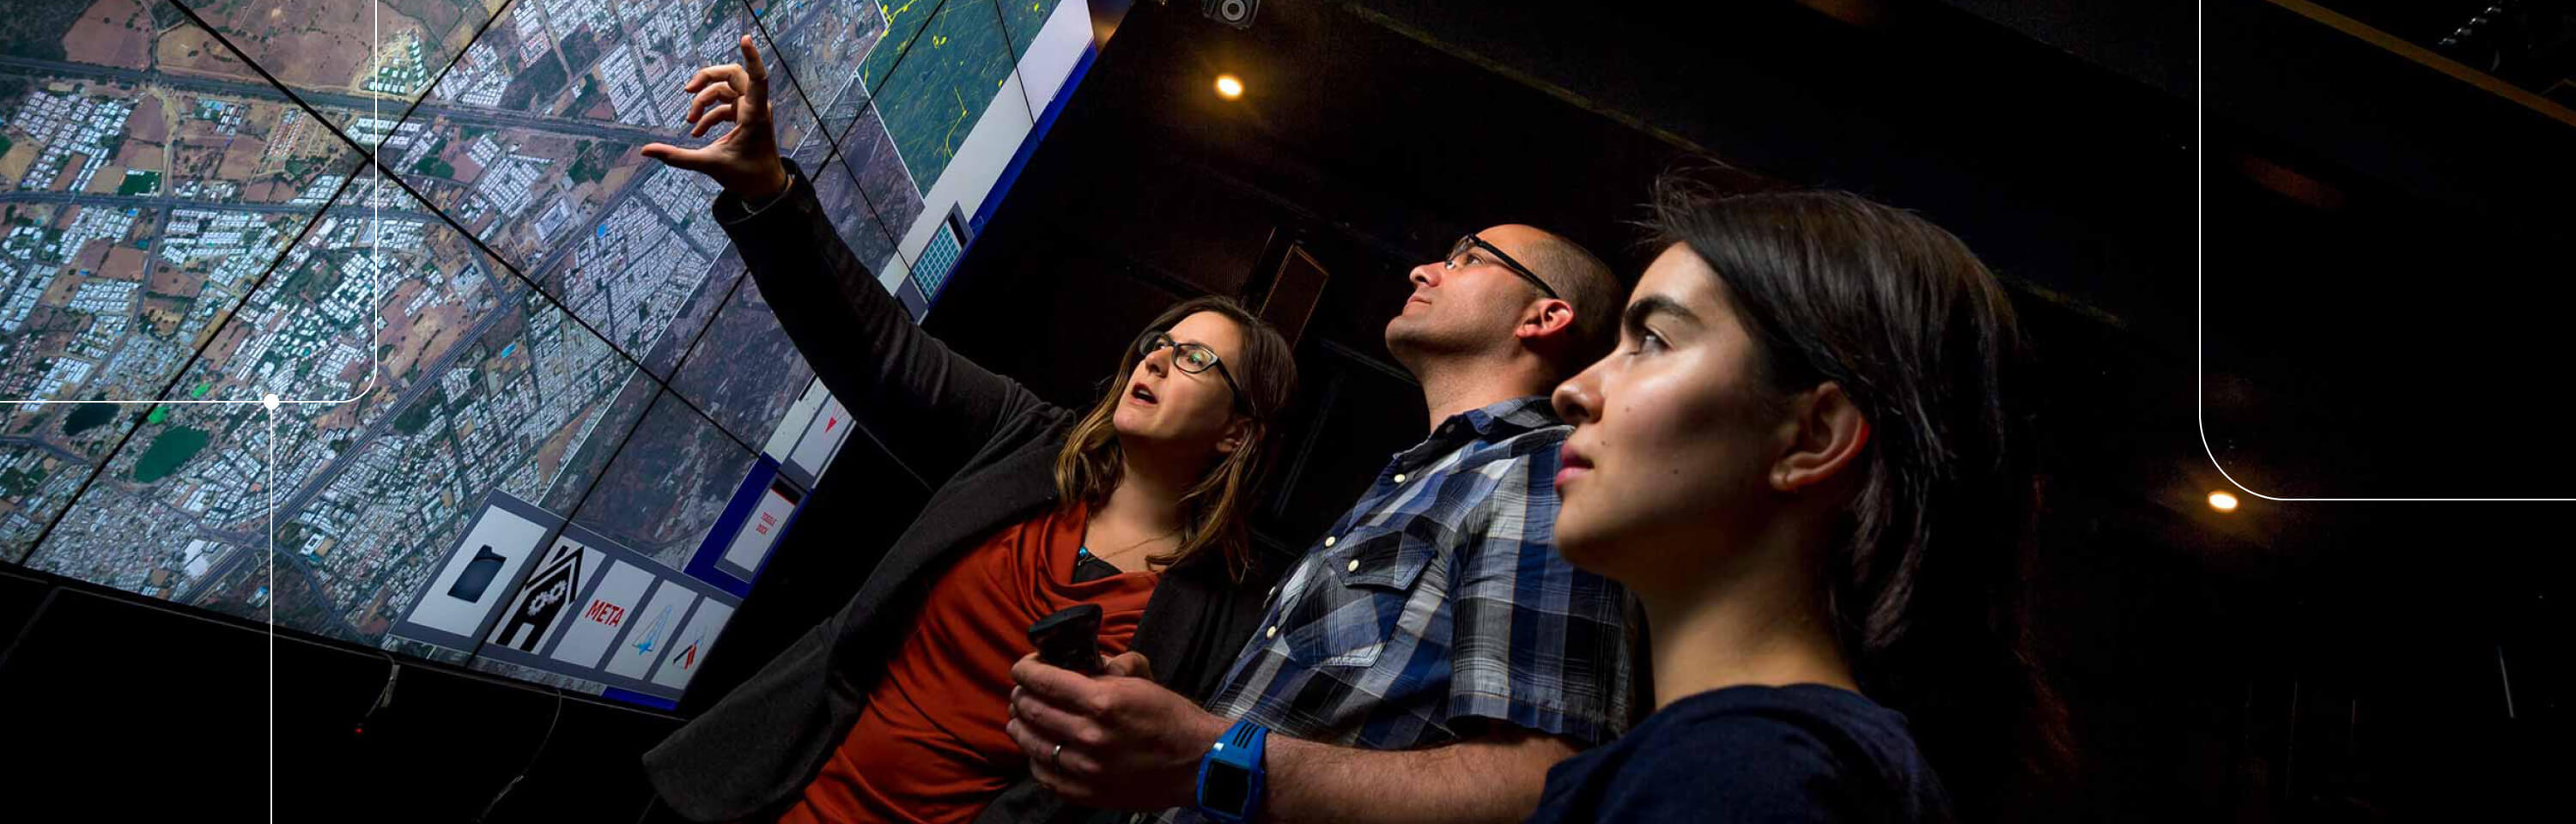 Three people in front of numerous screens showing a visualization of geographic information system data